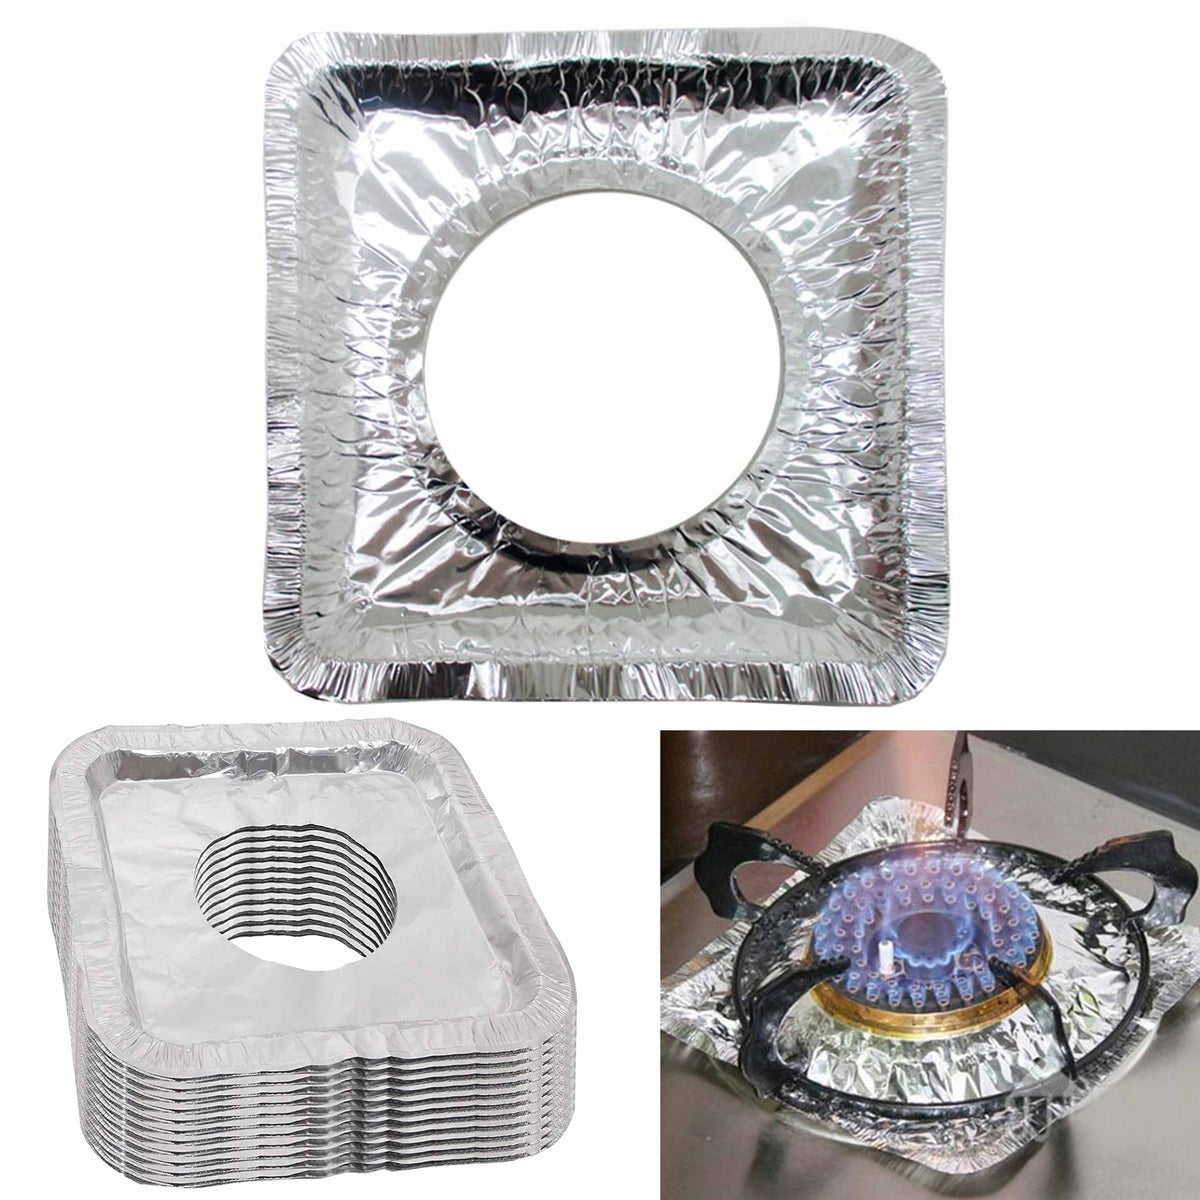  Aluminum Foil Square Gas Stove Burner Covers – Pack of 40 –  Disposable Bib Liners for Kitchen Gas Range Top - Keep Your Gas Range Clean  with DCS Deals Drip Pans 